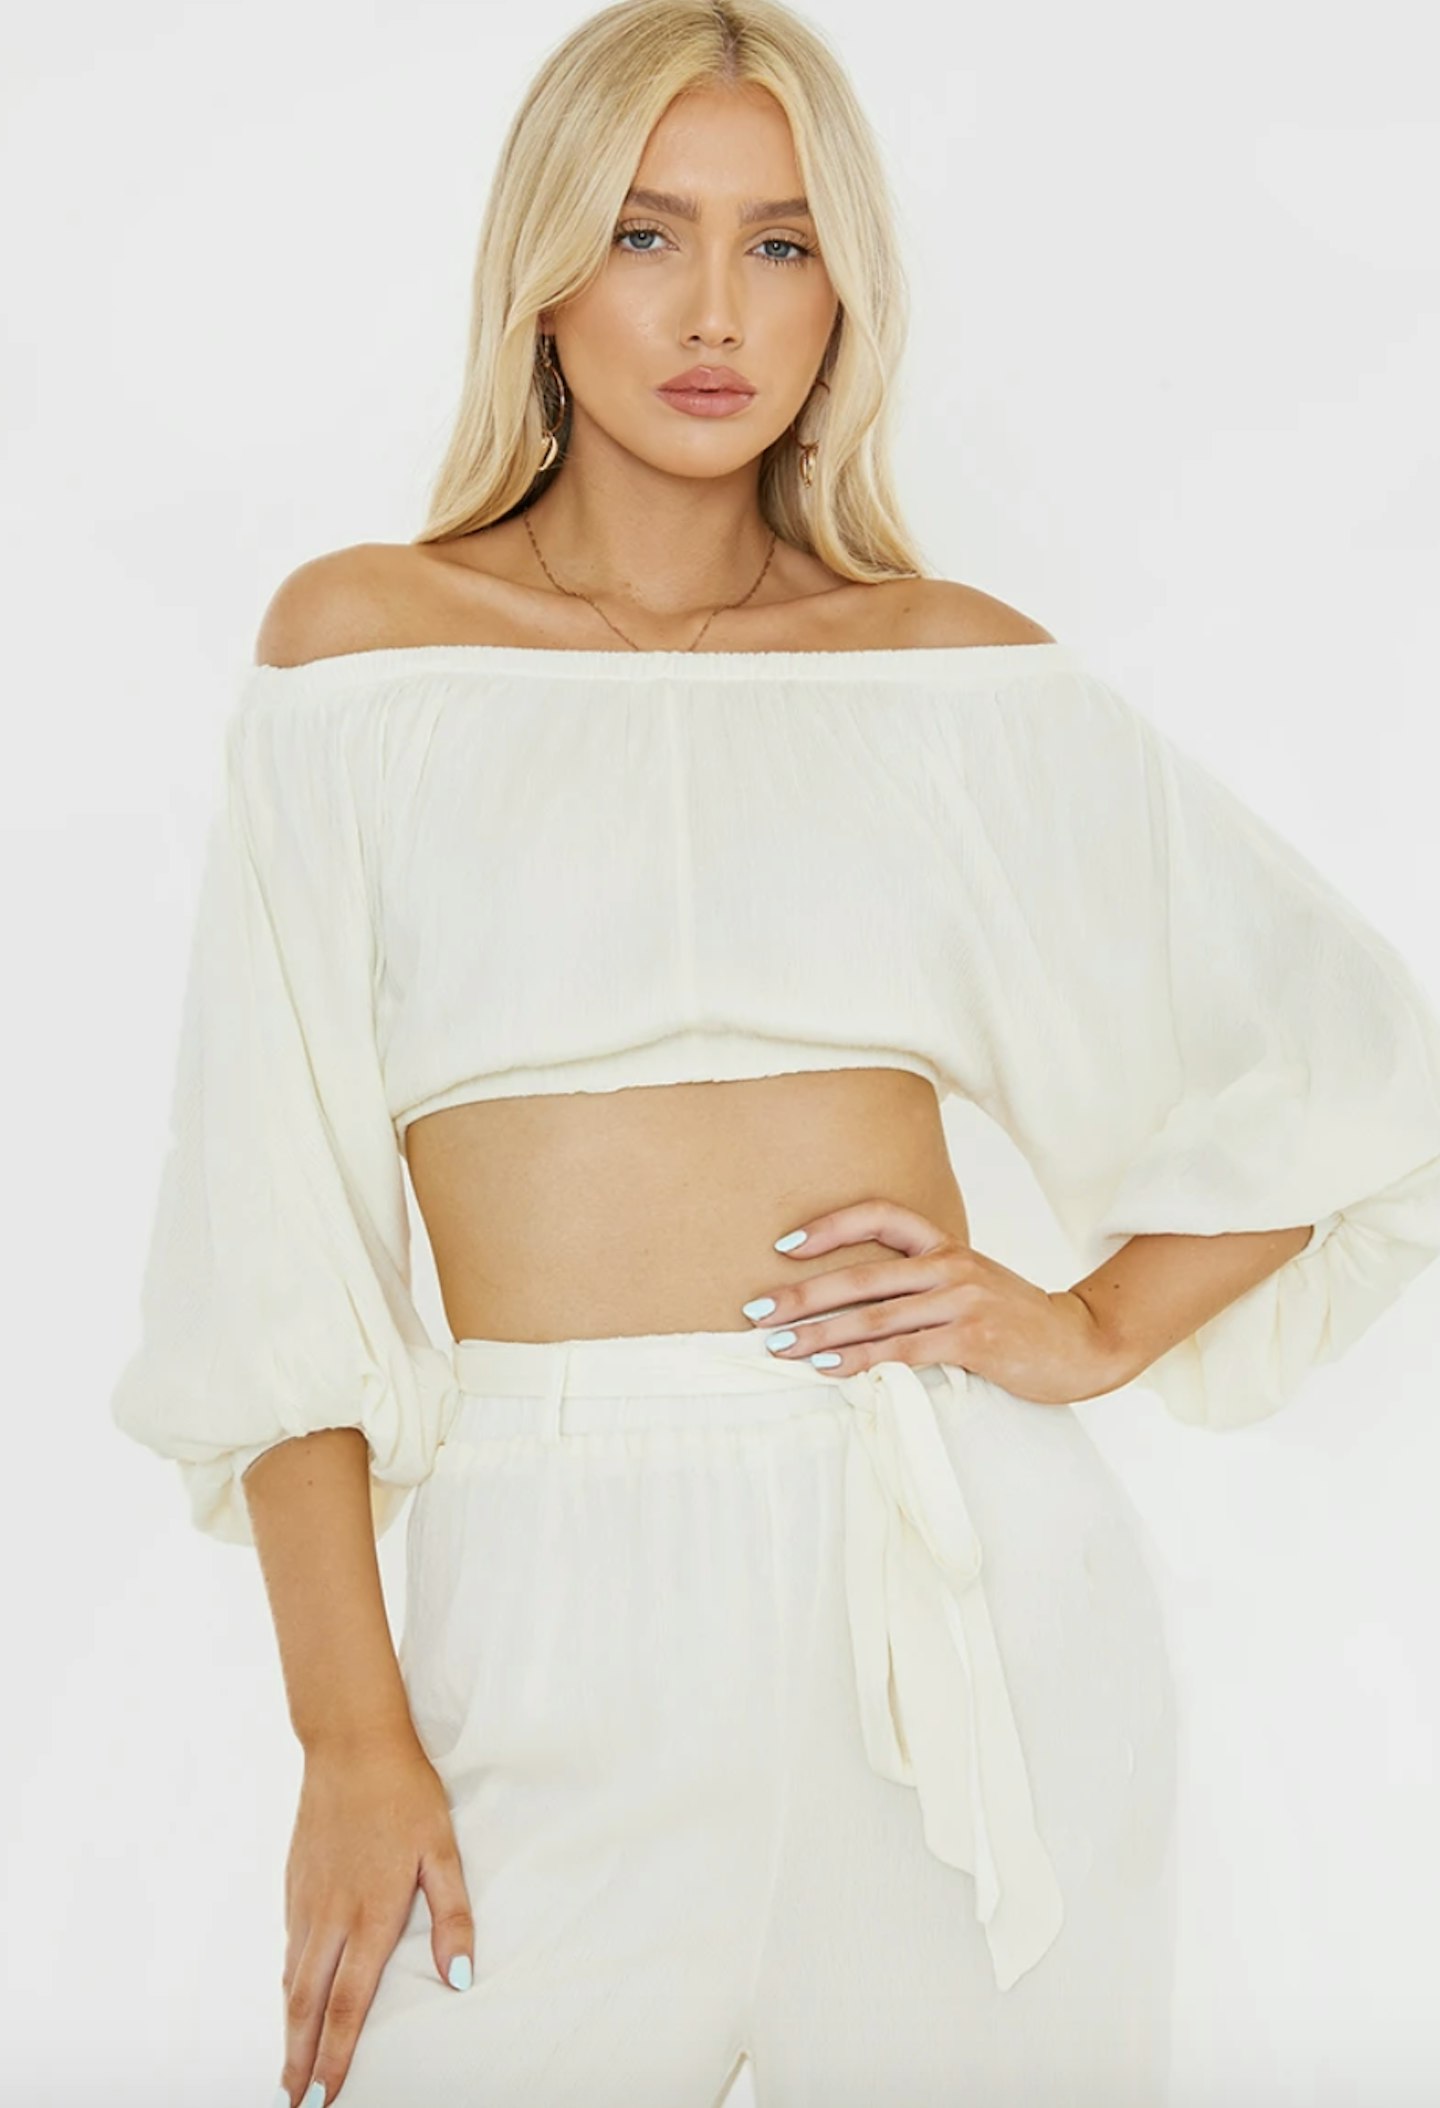 Lorna Luxe white 'avalon' cheesecloth bardot top